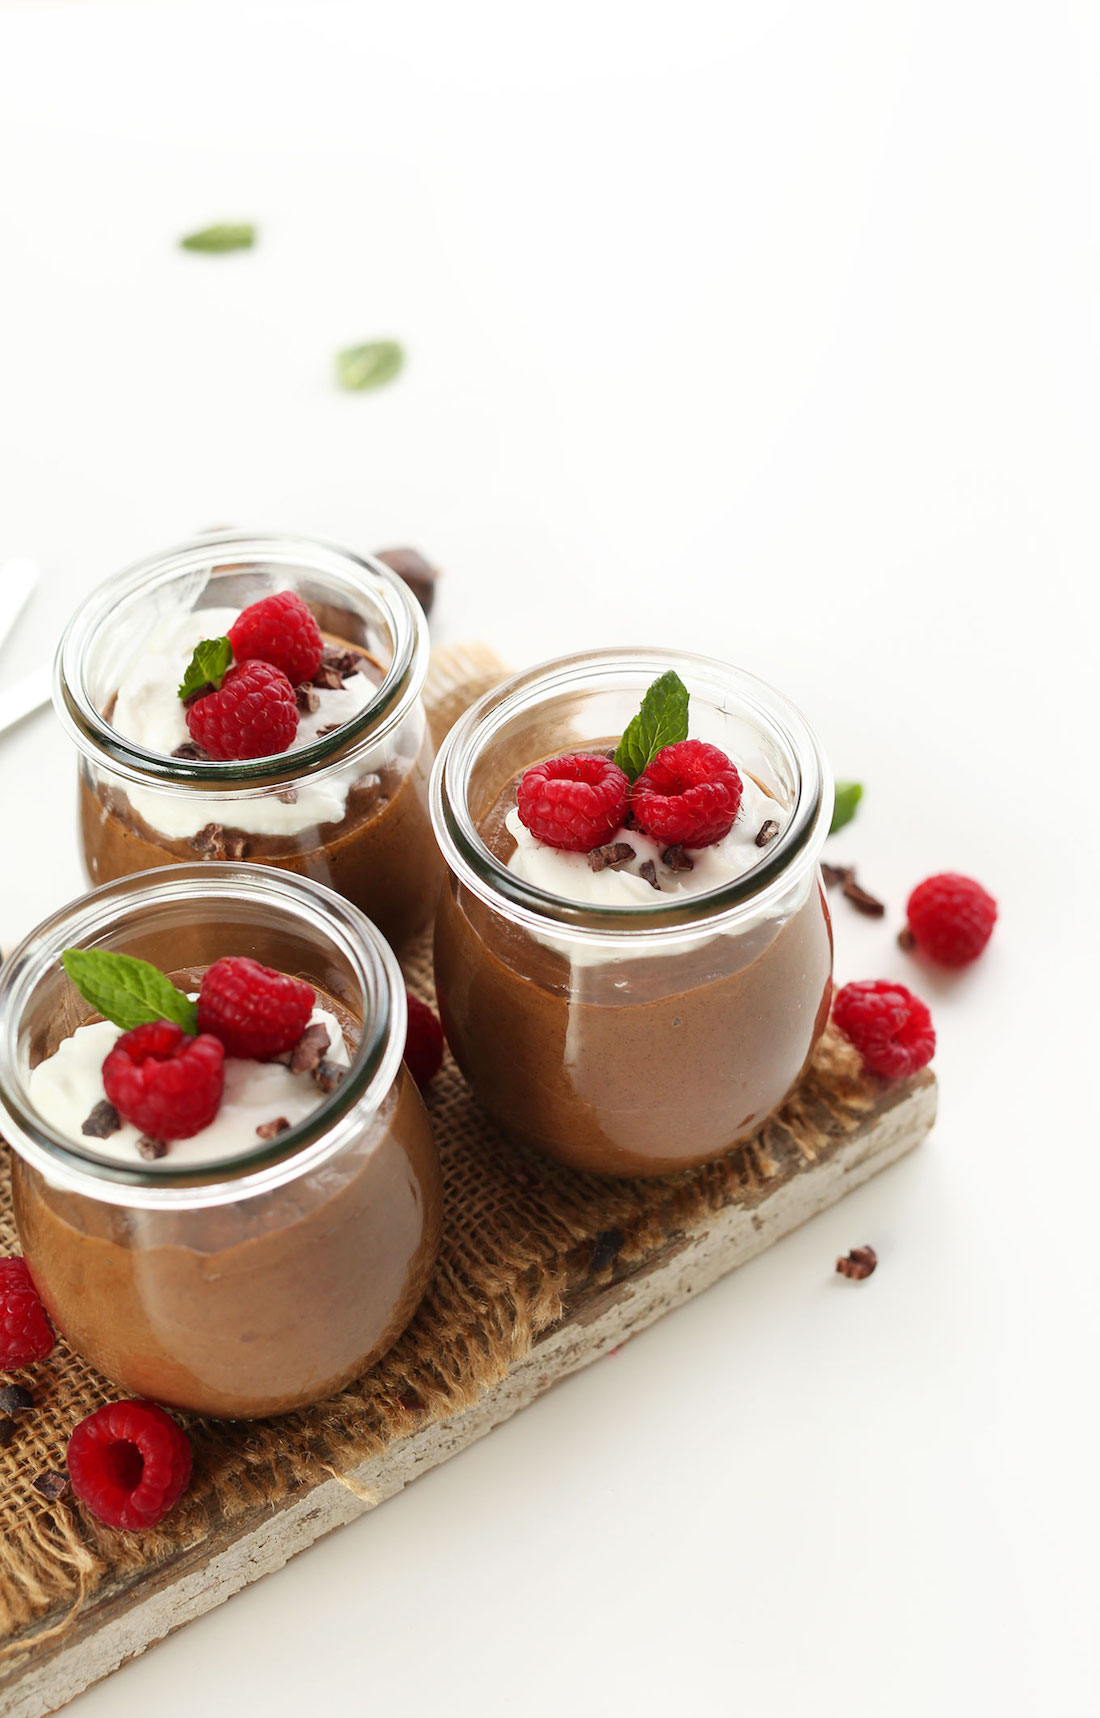 Healthy Chia Seed Recipes - Chocolate Chia Seed Pudding